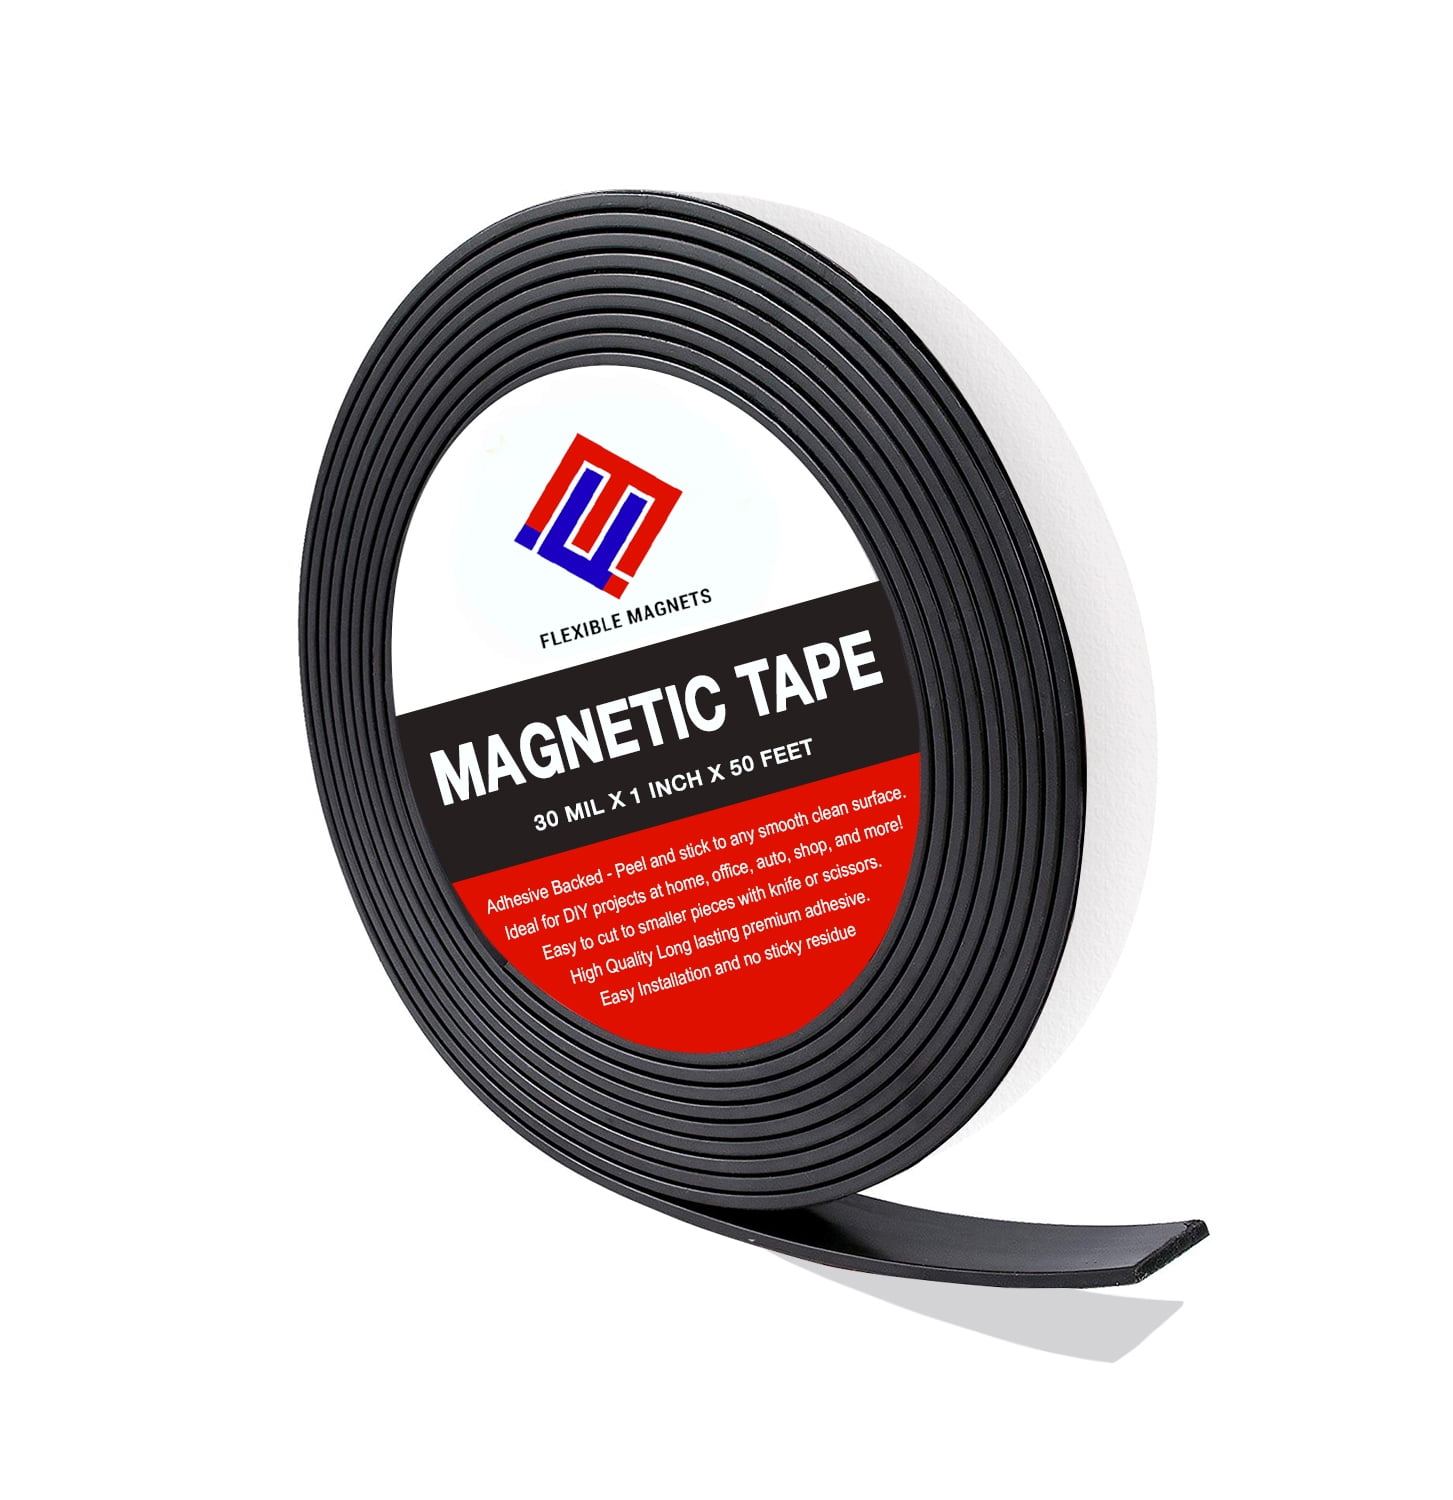 3.5 x 5 (30 mil) Magnetic Adhesive Magnet Sheets